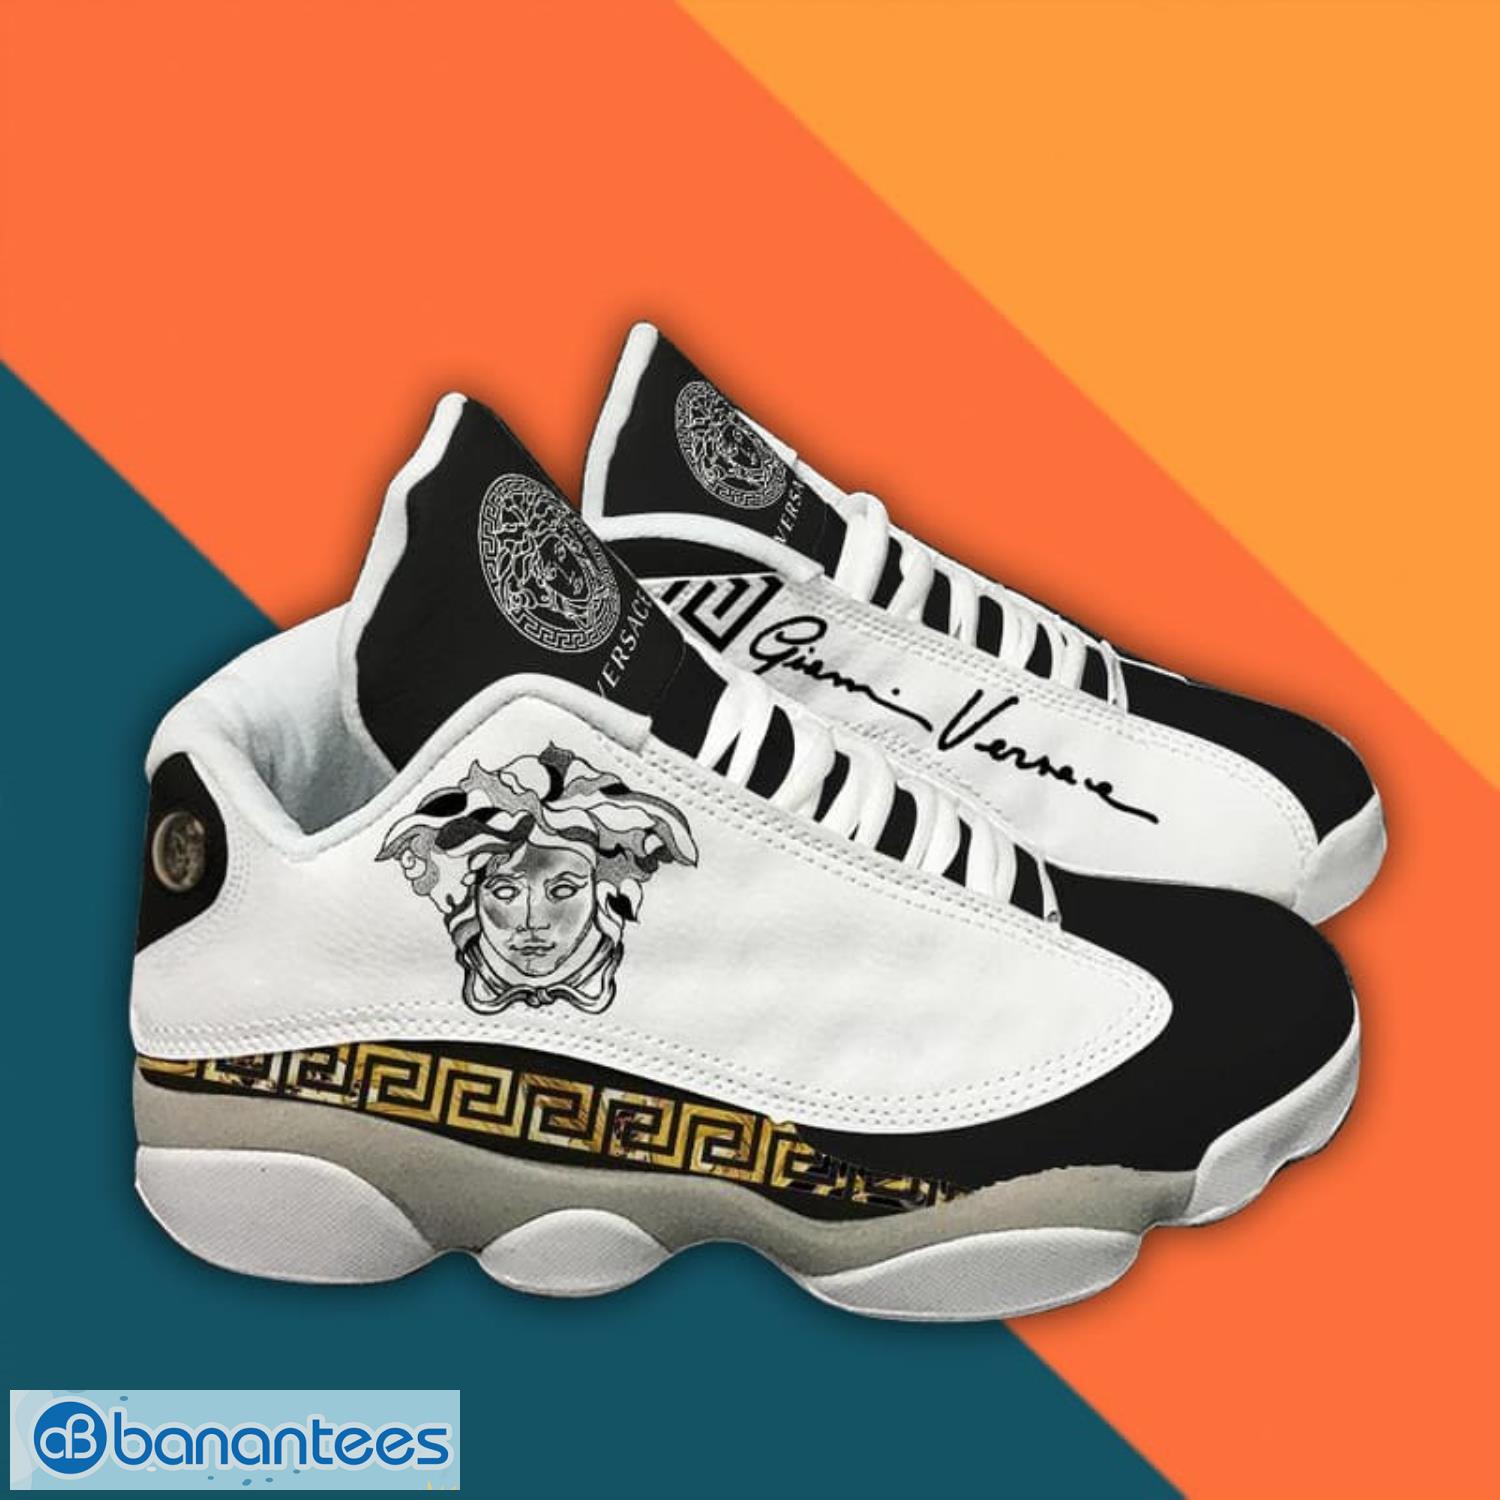 Versace Black And White Air Jordan 13 Sneaker Shoes Product Photo 2